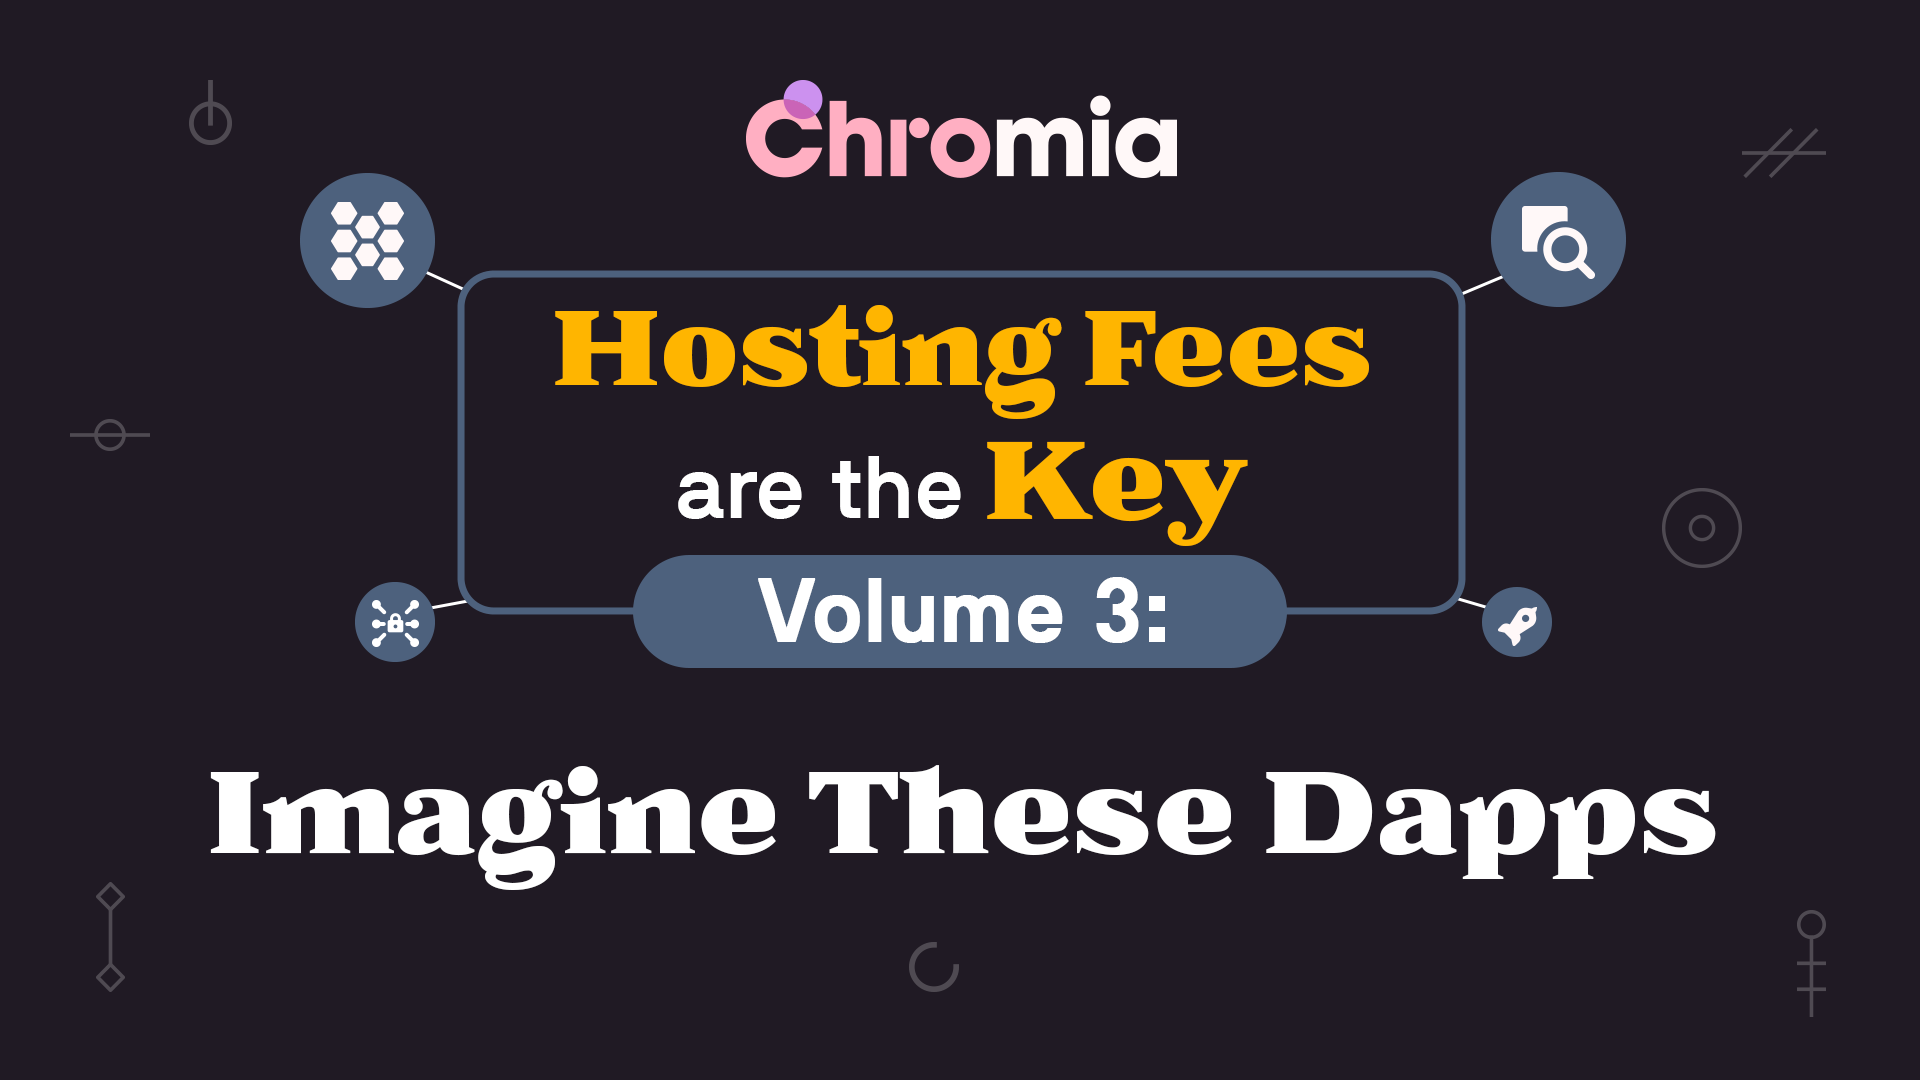 Hosting Fees are the Key, Volume 3: Imagine these Dapps